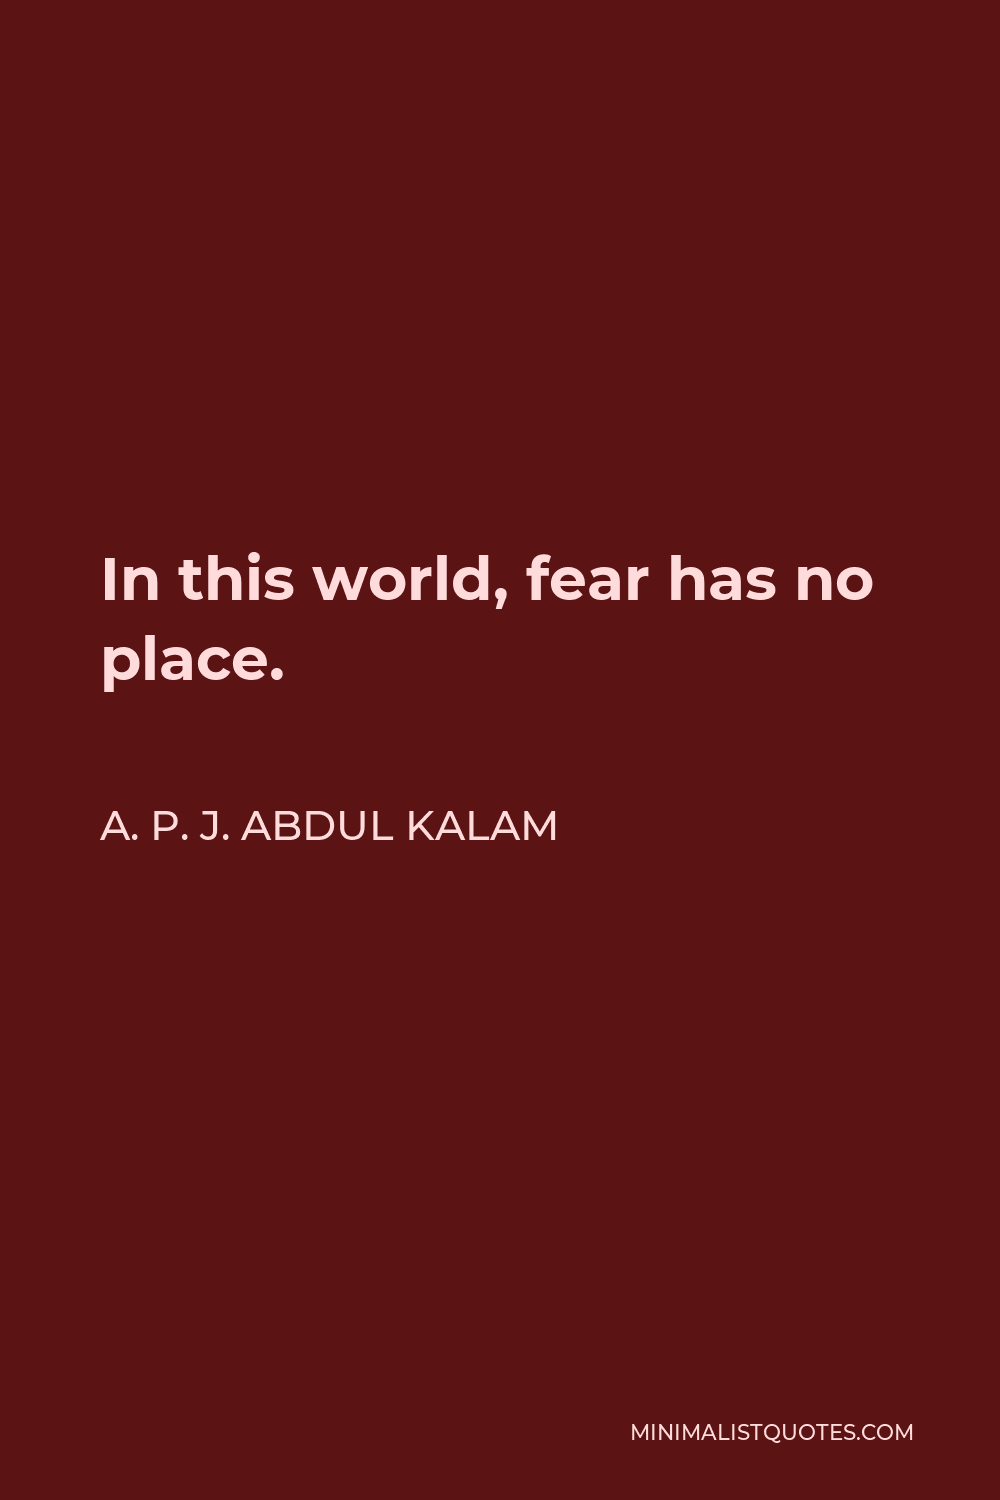 A. P. J. Abdul Kalam Quote - In this world, fear has no place.